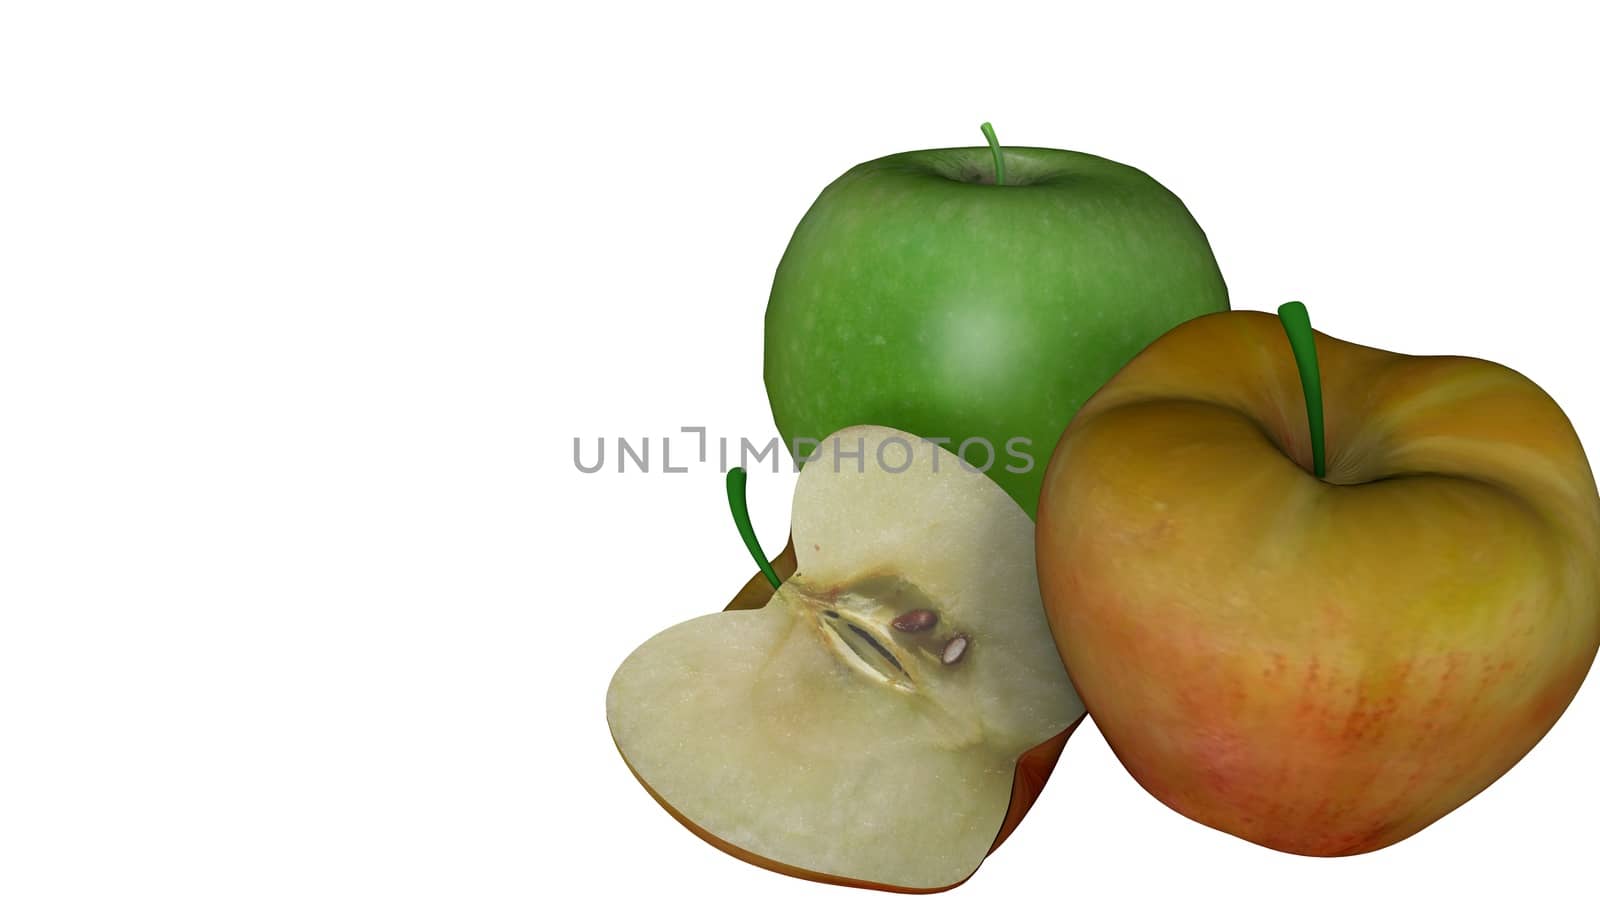 Red apple and green apple isolated on white background by Photochowk